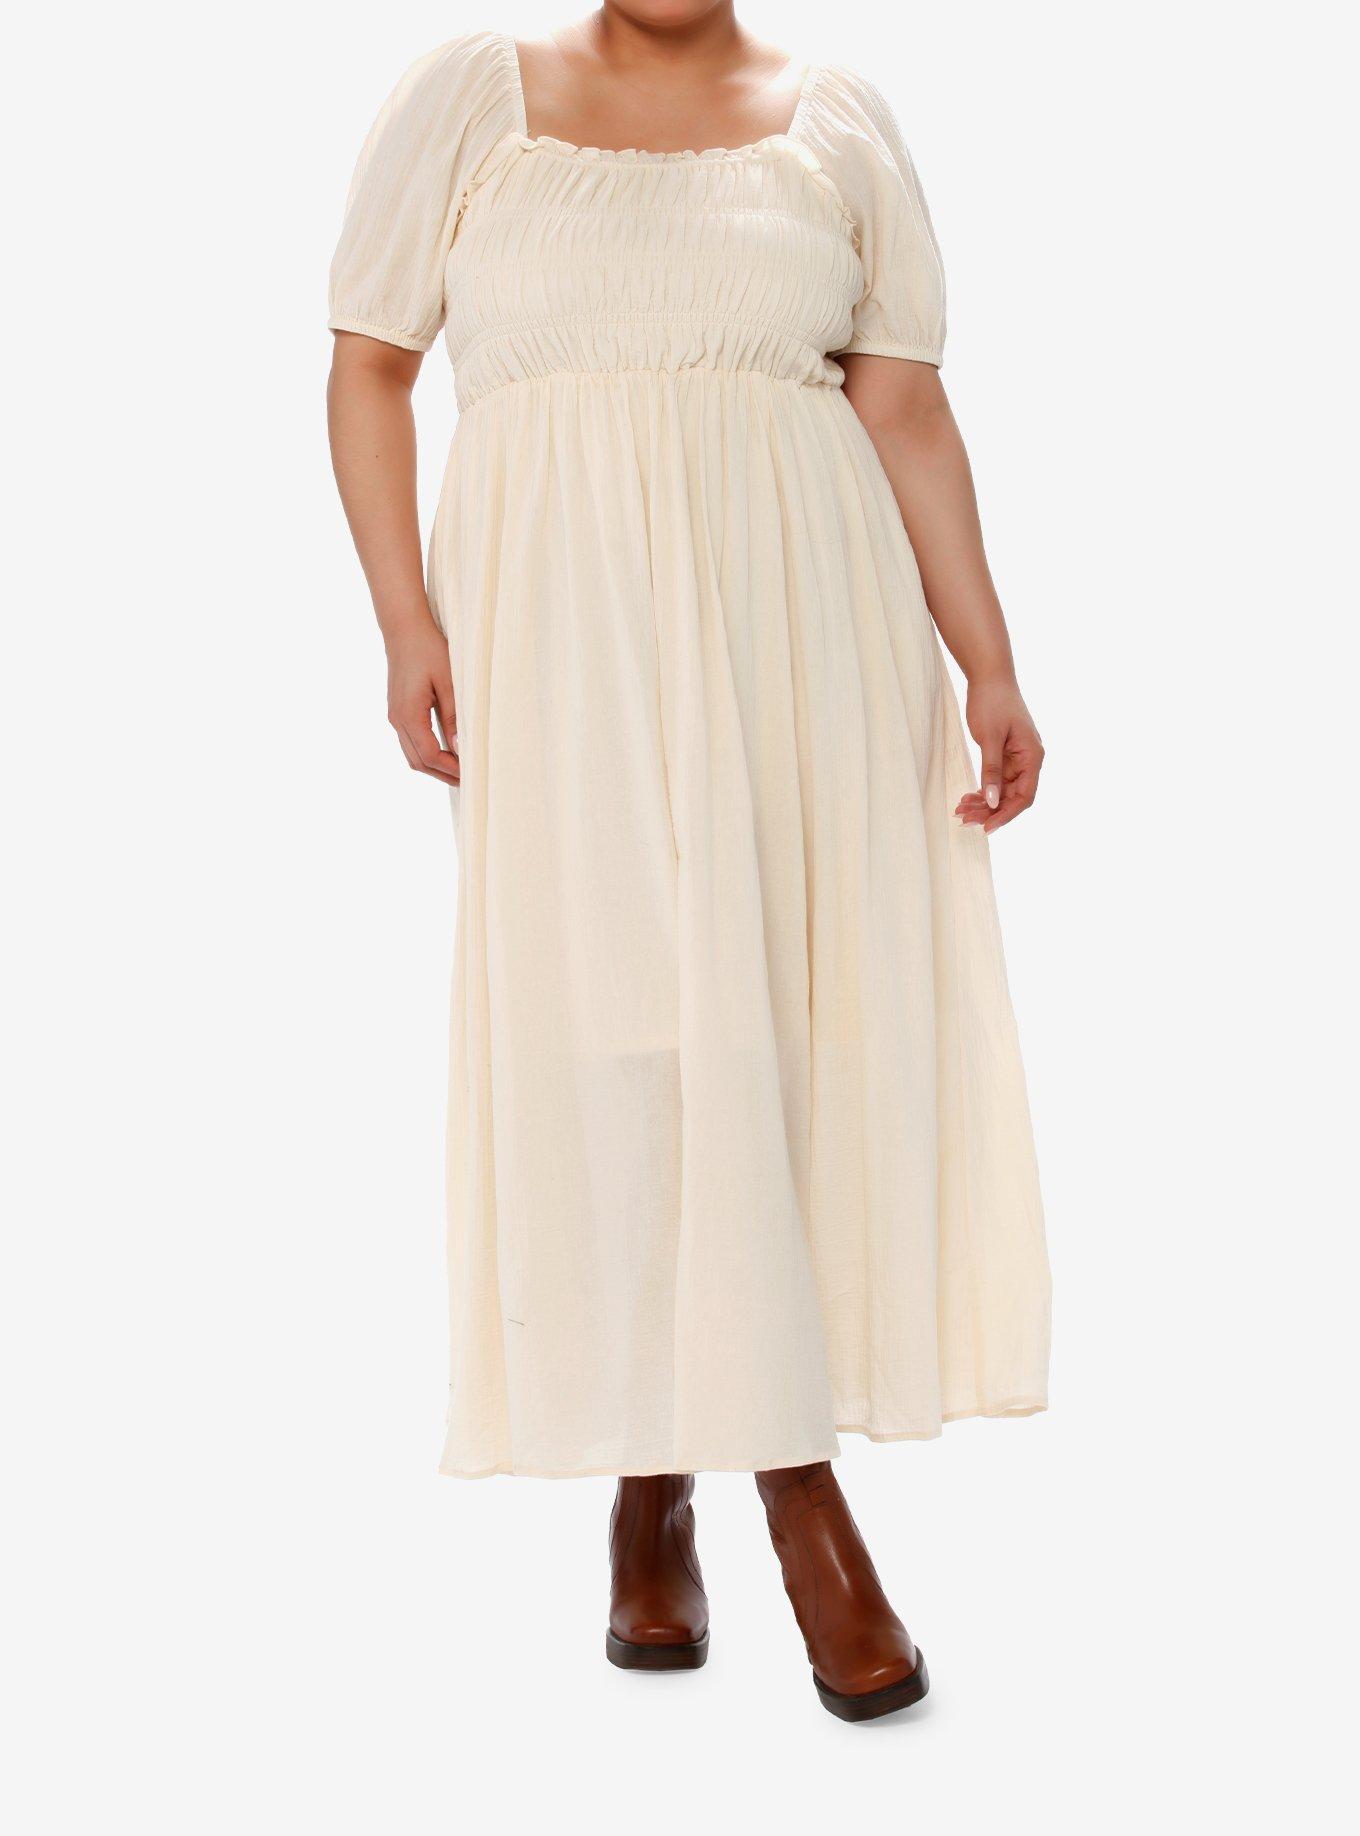 Thorn & Fable Ivory Smocked Maxi Dress Plus Size, IVORY, hi-res